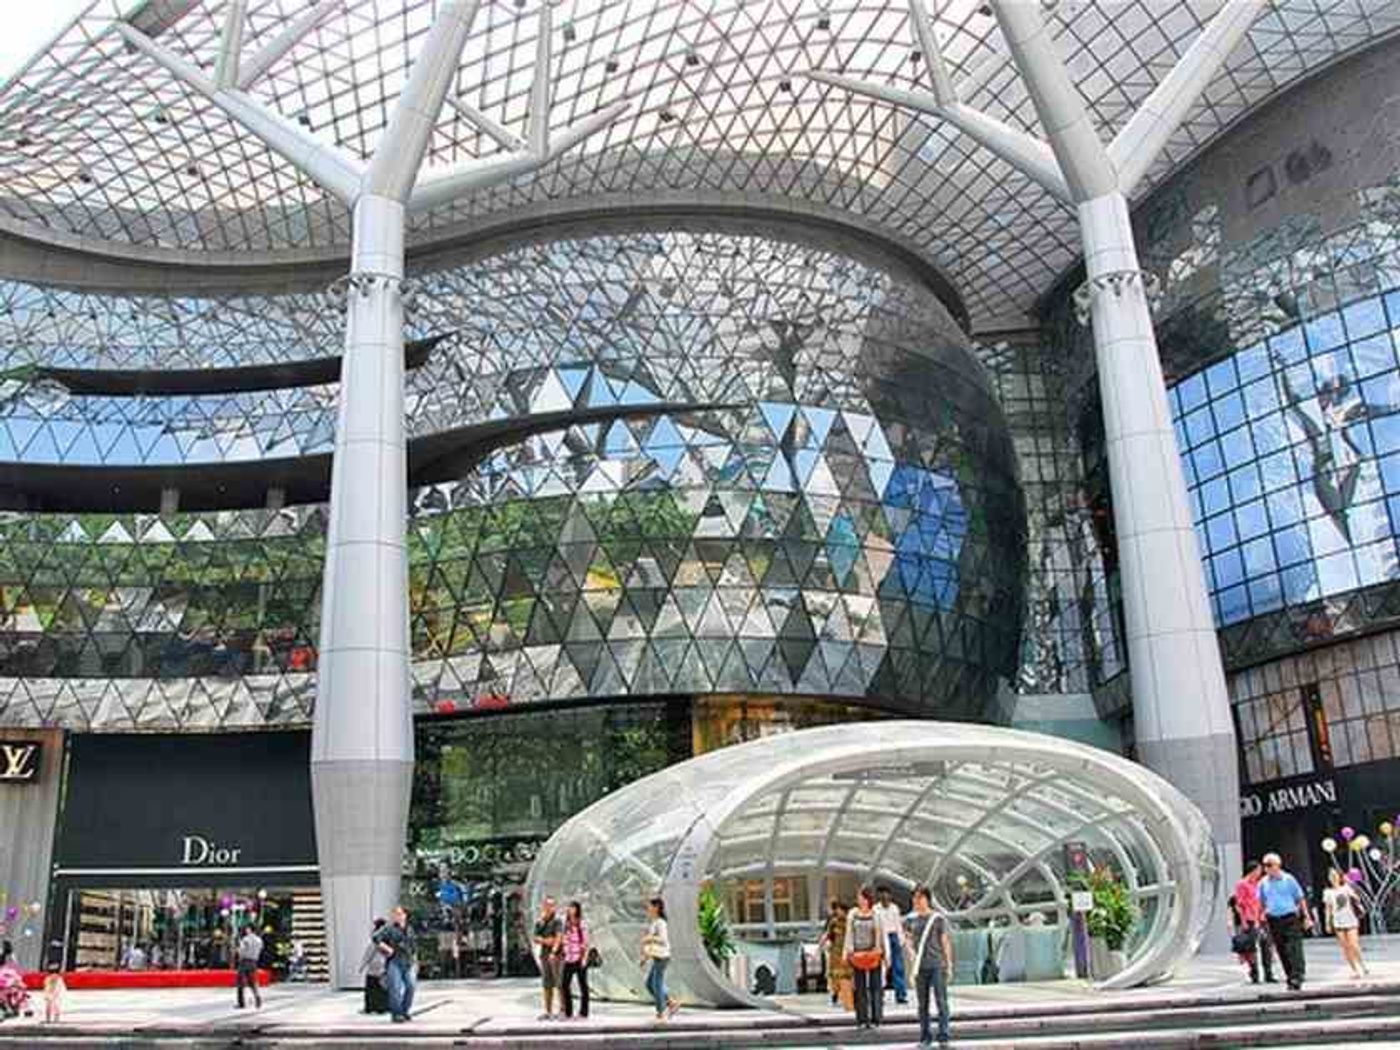 ION Orchard Mall